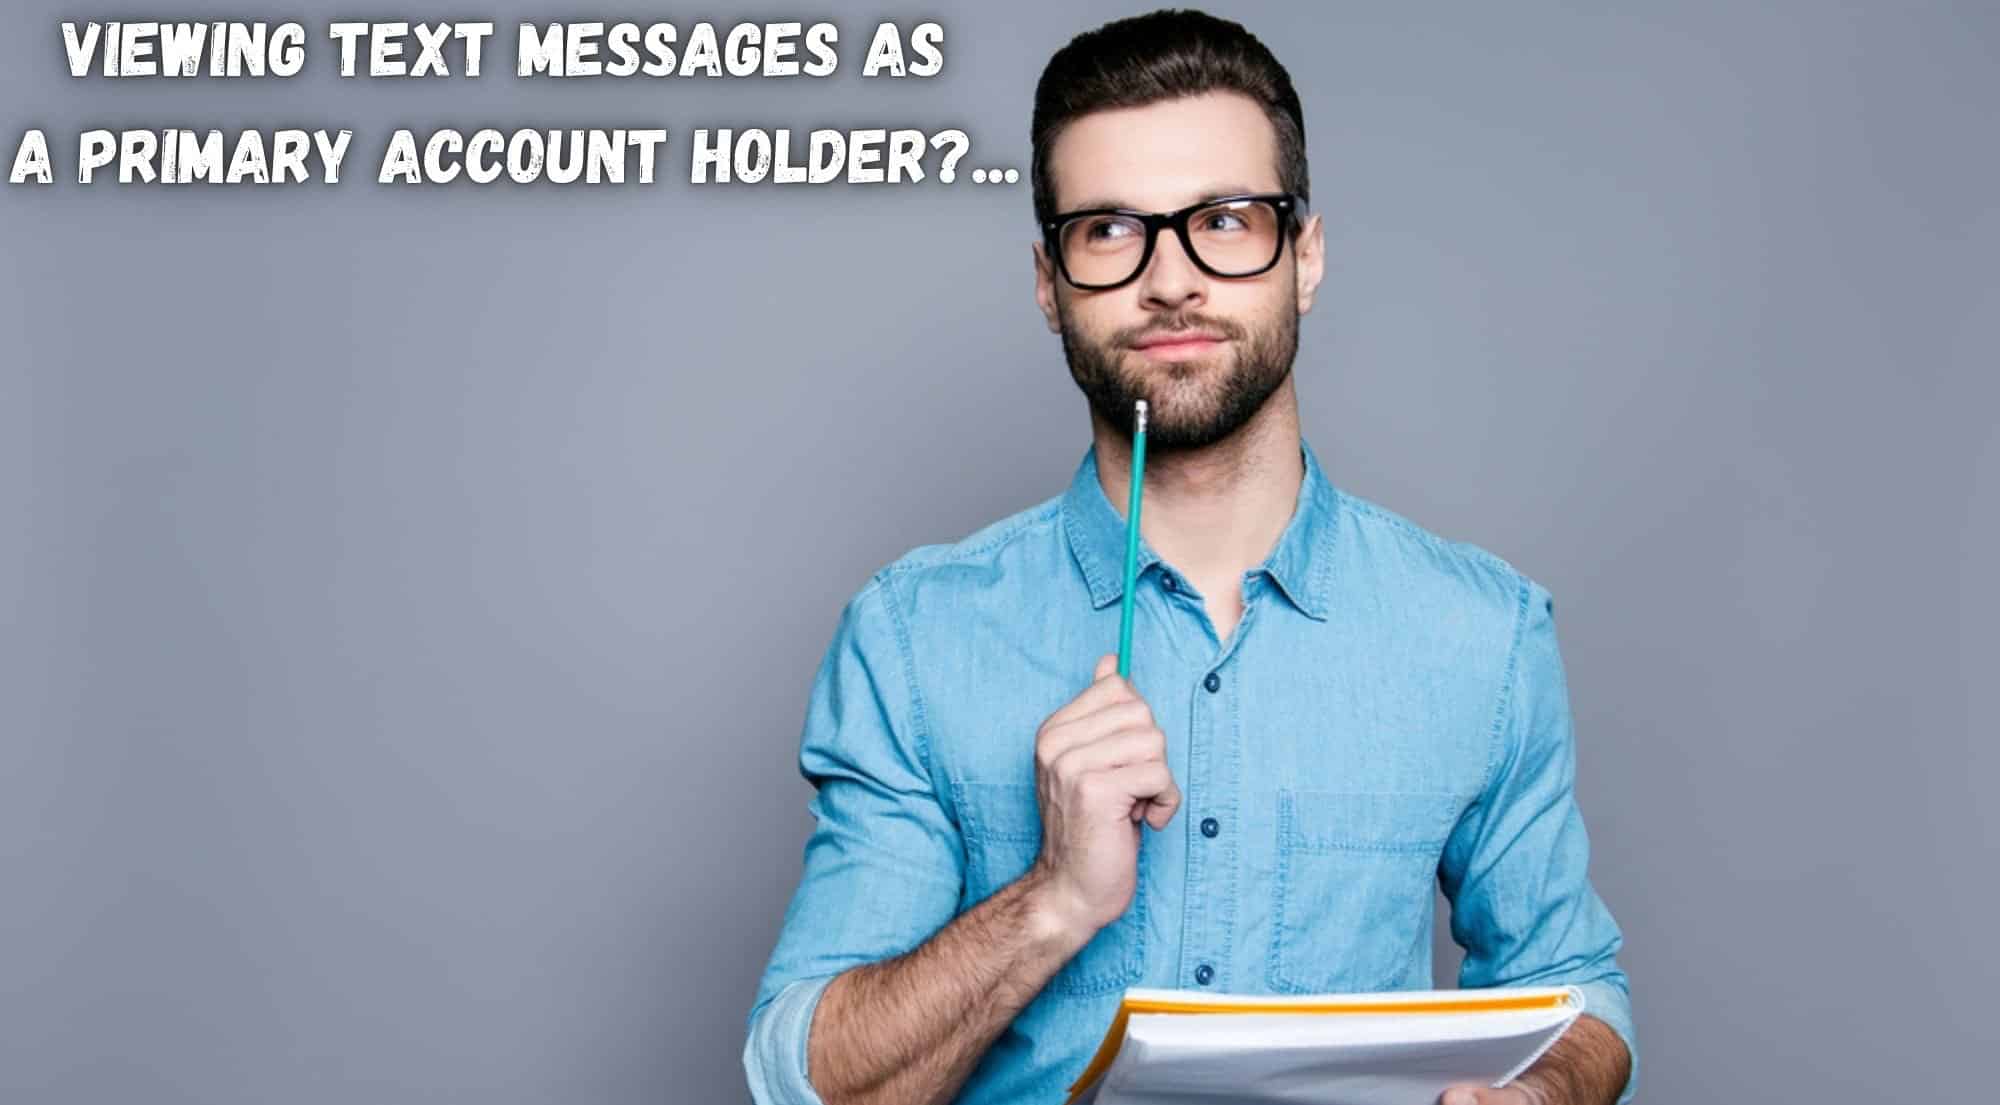 Can Primary Account Holder View Text Messages T-Mobile Viewing Text Messages as a Primary Account Holder